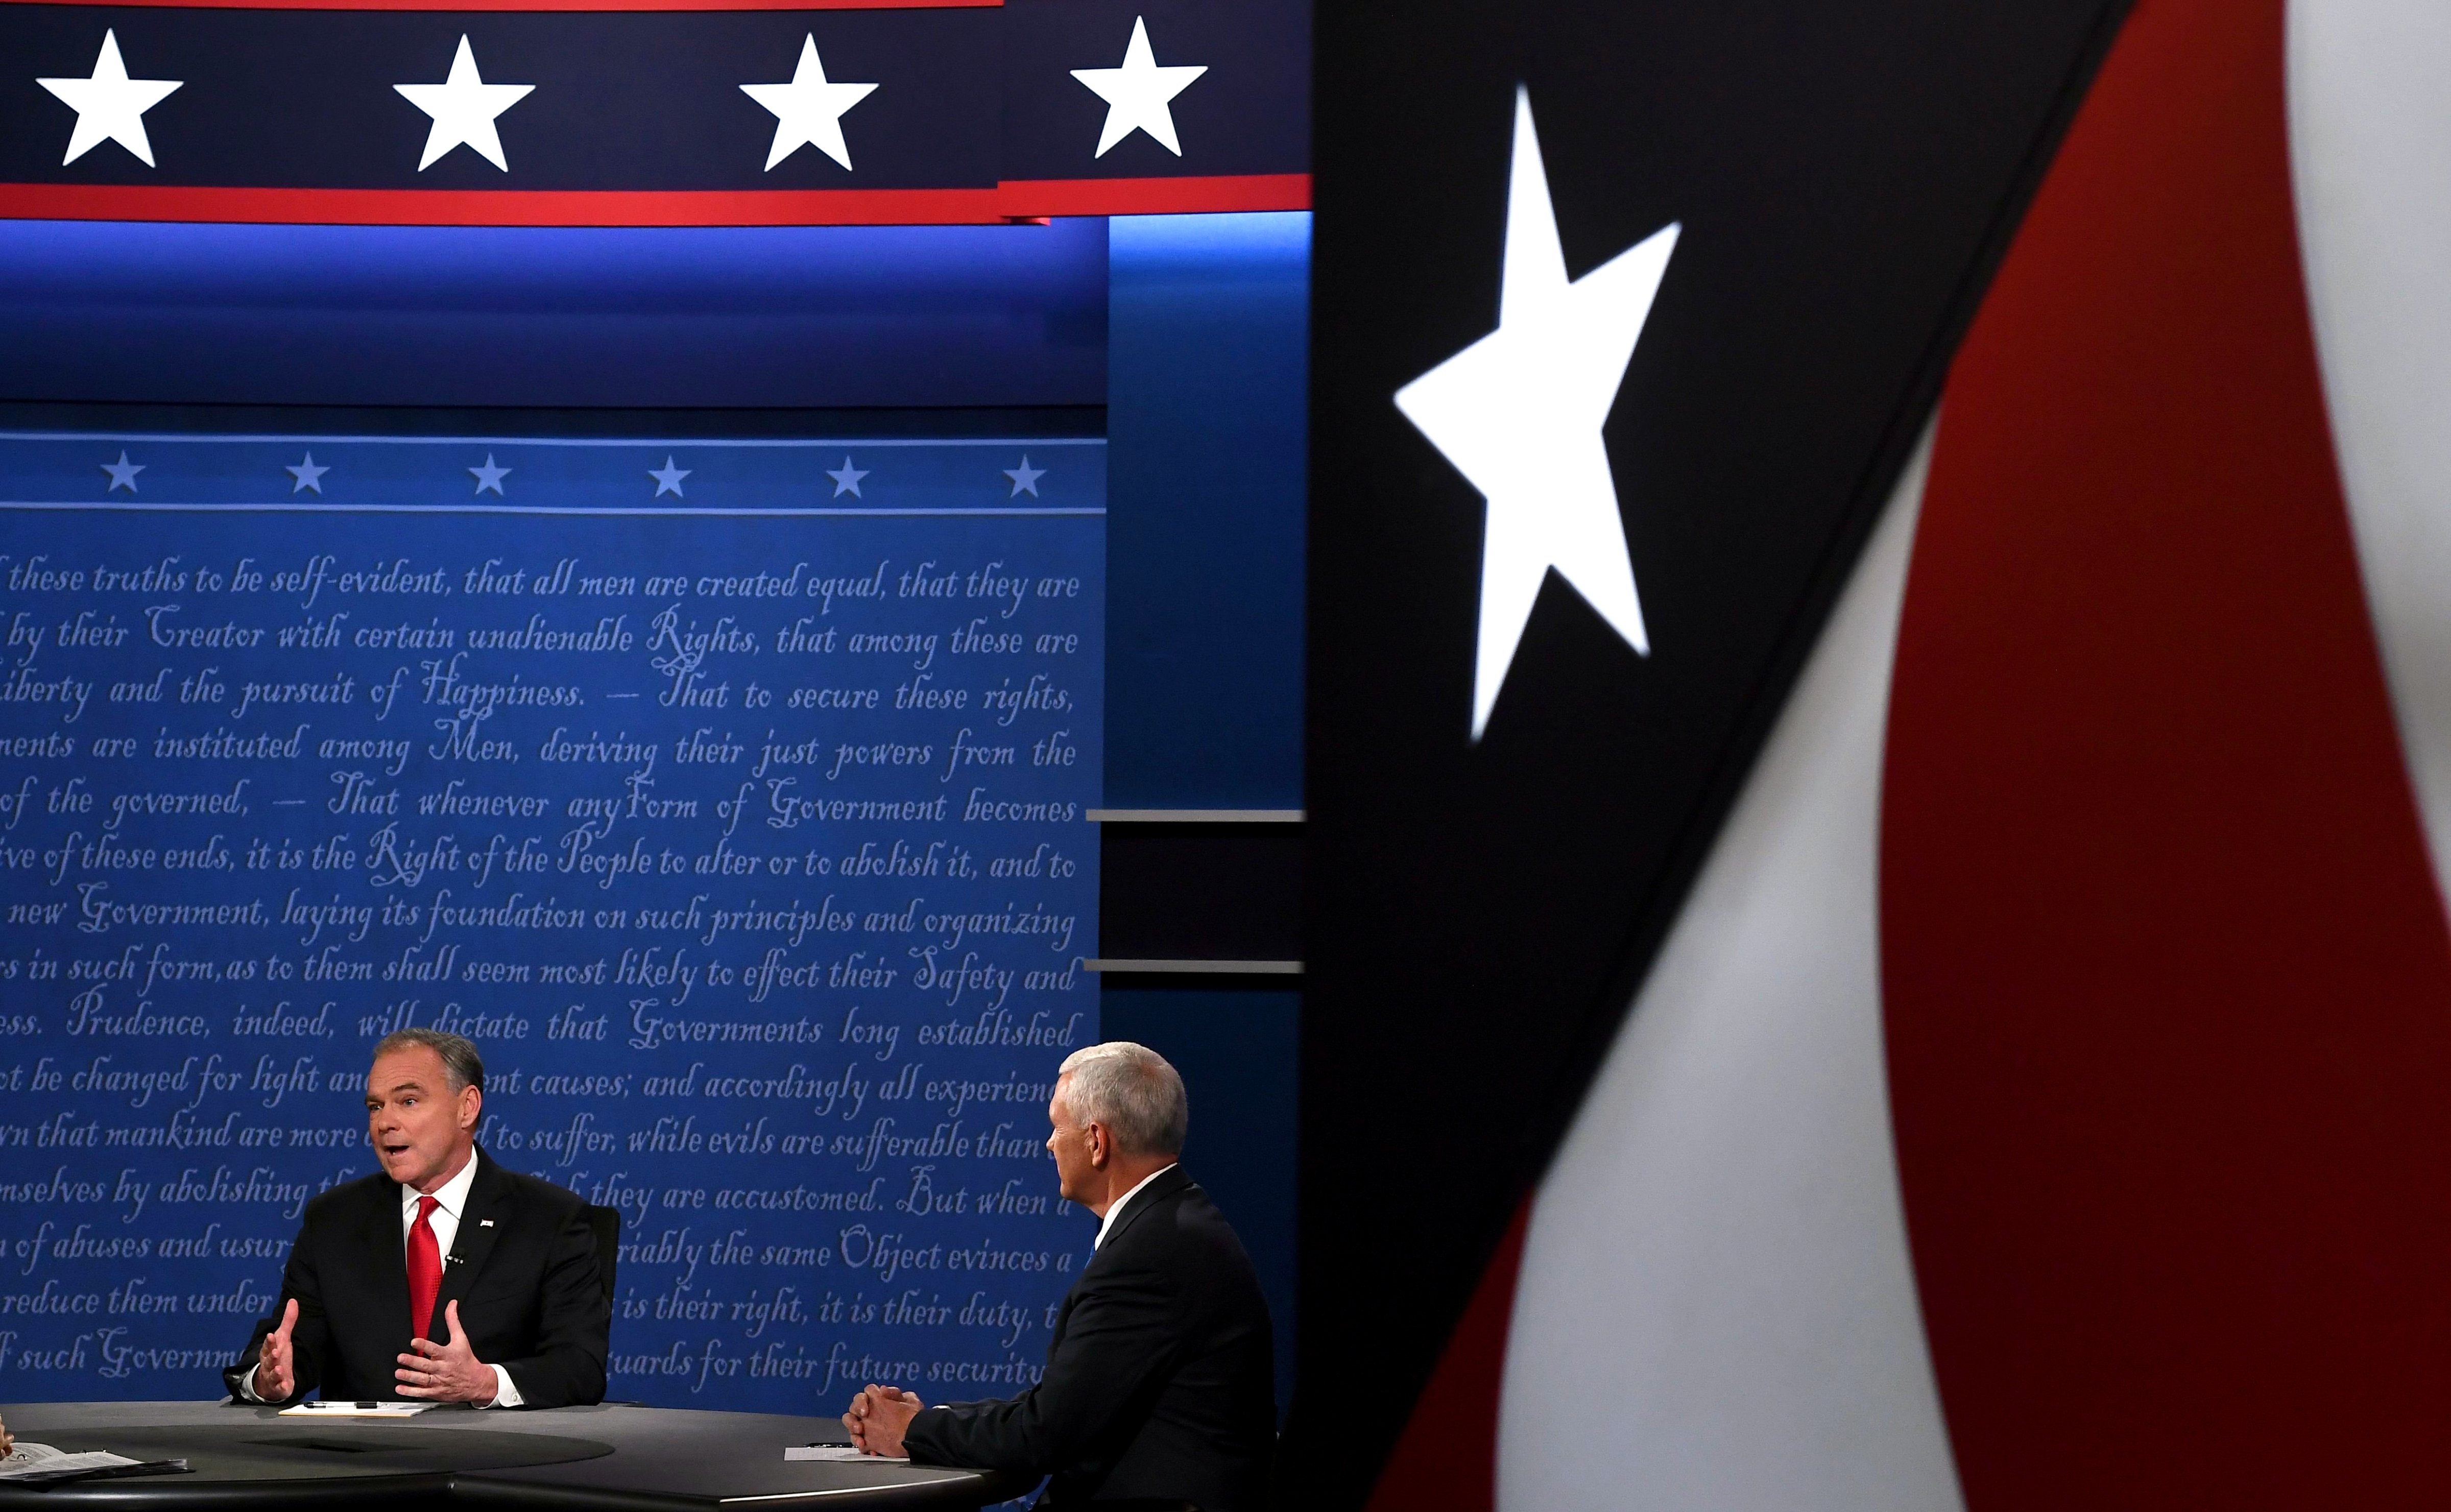 Vice presidential nominees Tim Kaine and Mike Pence speak  during the vice presidential debate at Longwood University in Farmville, Va. on Oct. 4, 2016. (Jewel Samad—AFP/Getty Images)